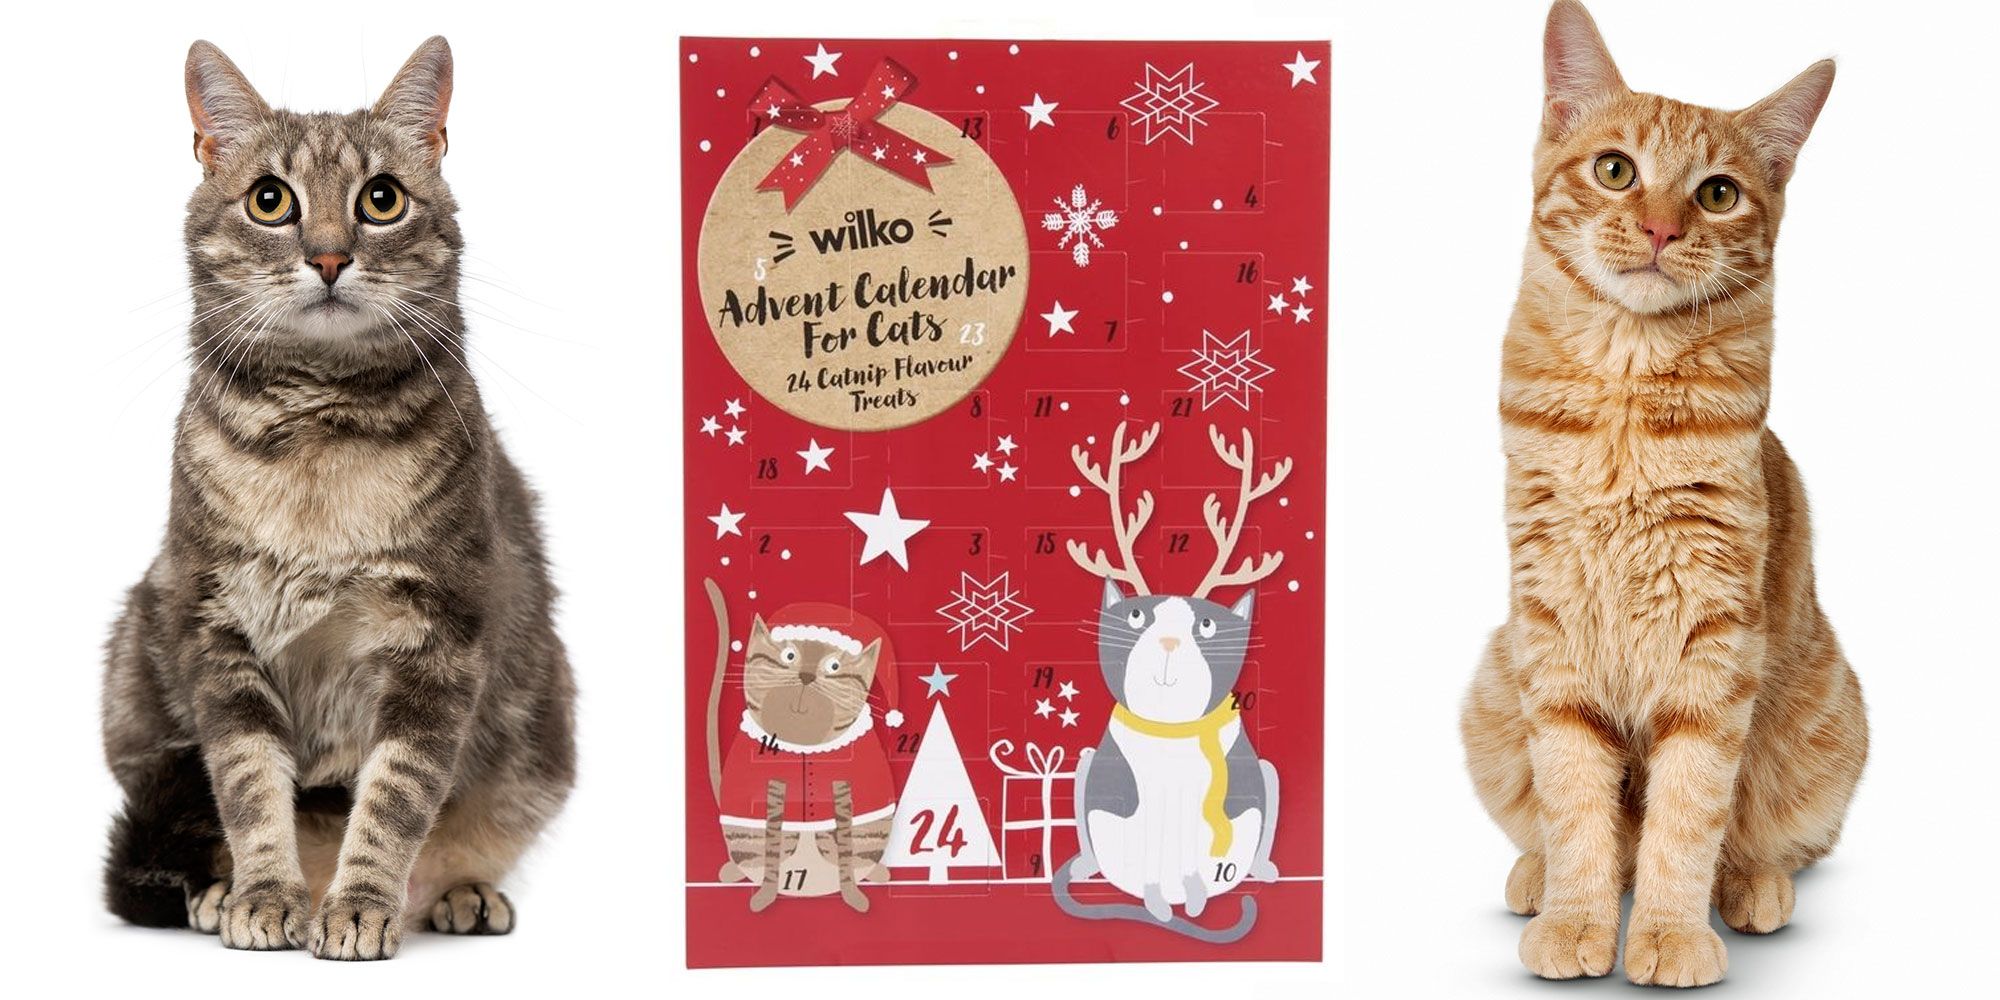 Details about   Trader Joe's Advent Calendar for CATS 2020 